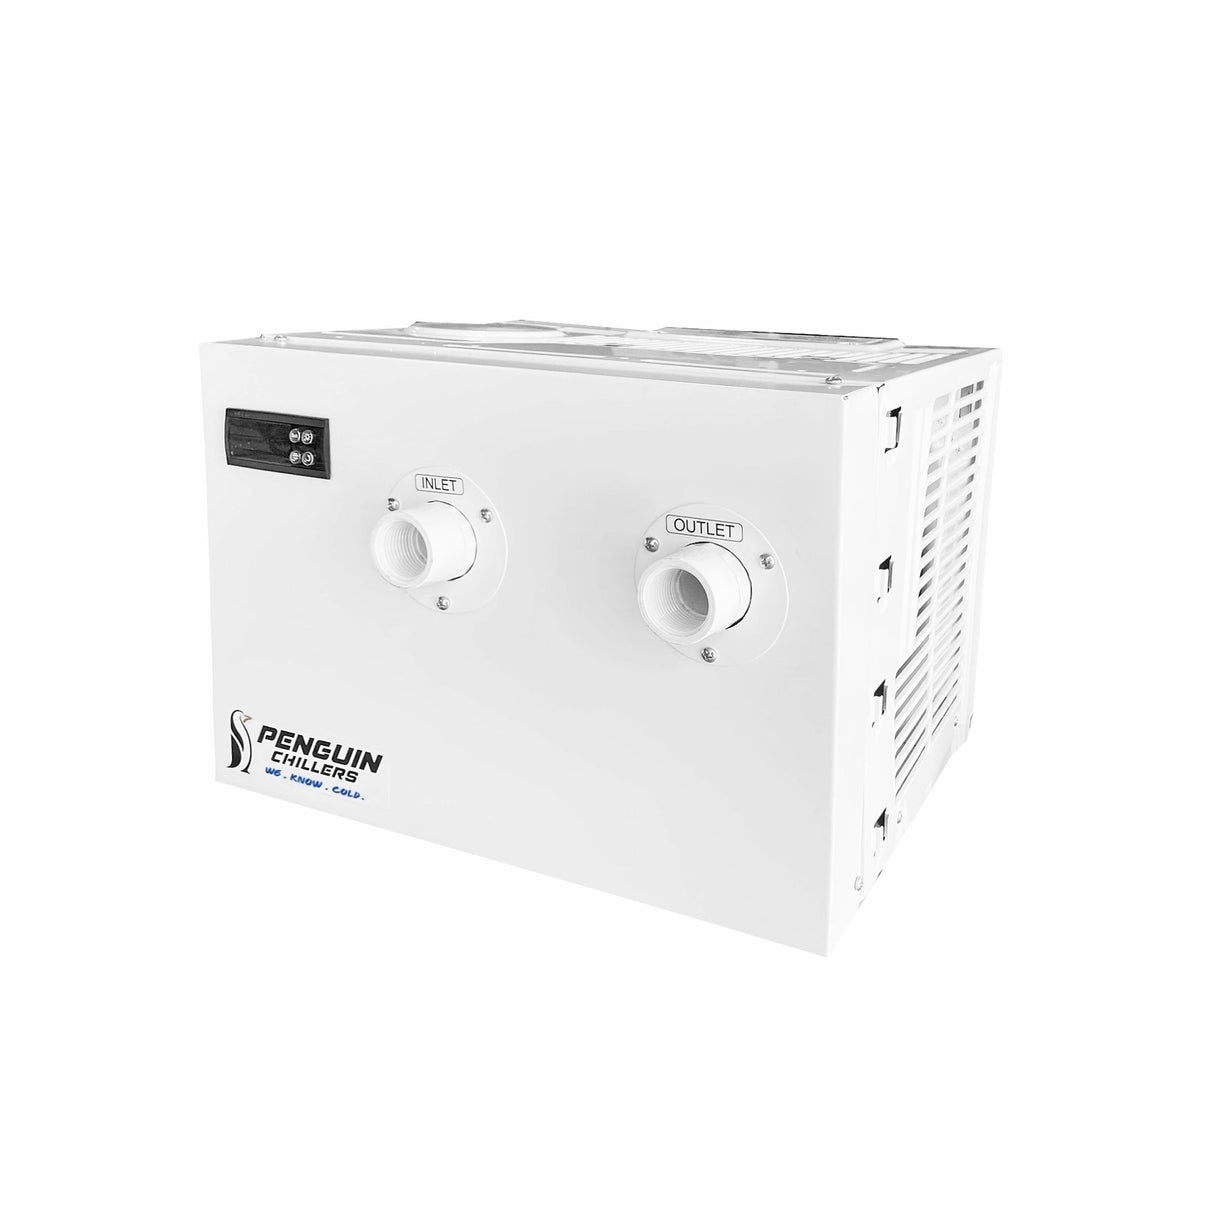 Penguin Chillers | Standard High Efficiency Water Chiller (½ HP)